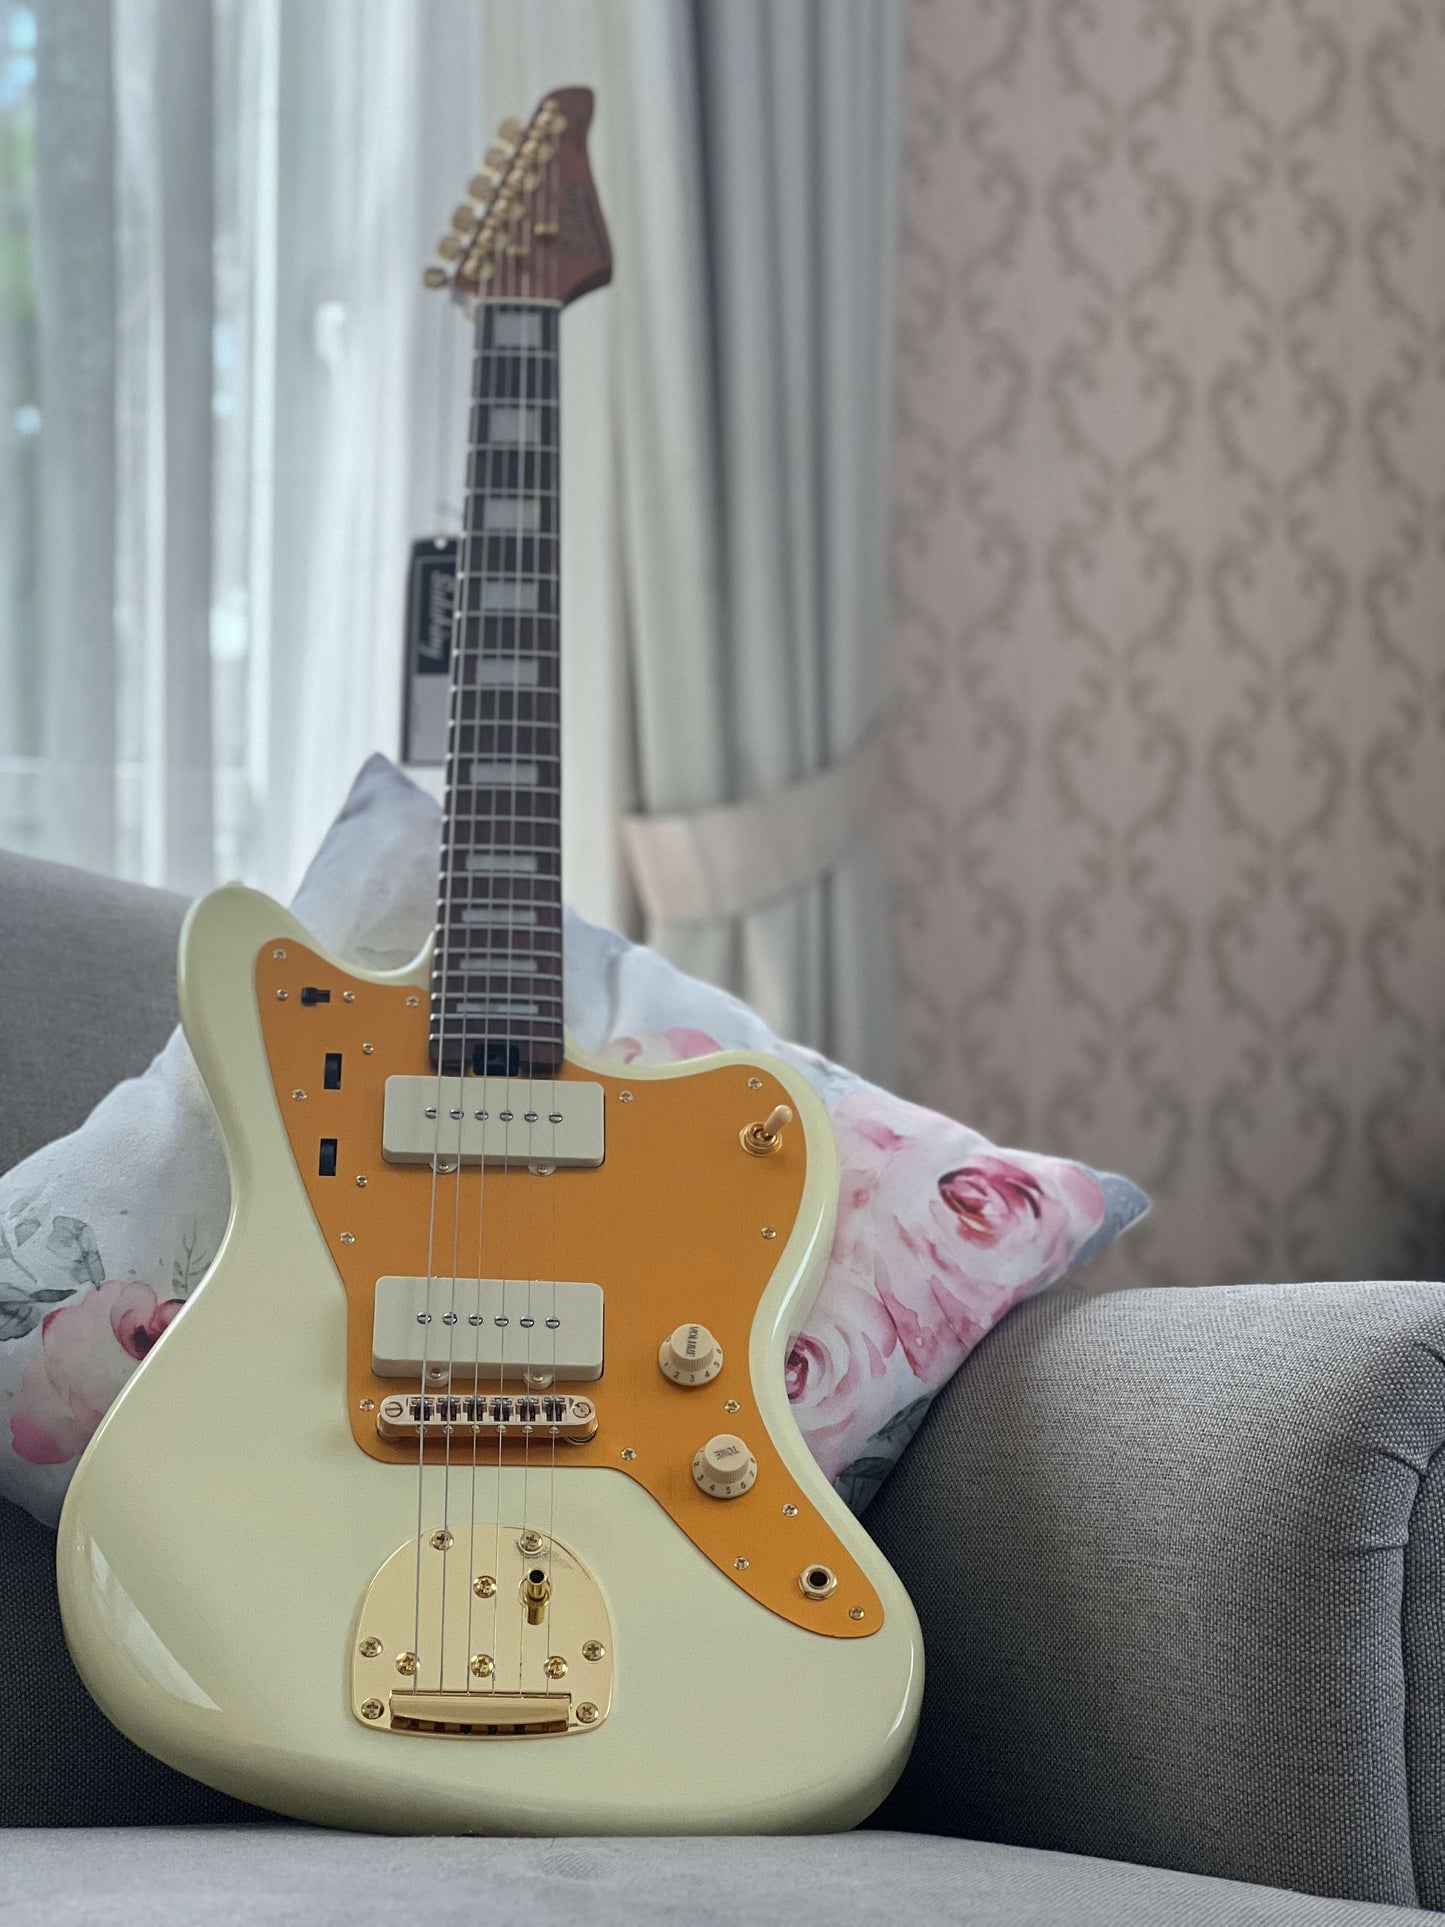 Soloking JM40 Offset Deluxe in Olympic White with Gold Hardware